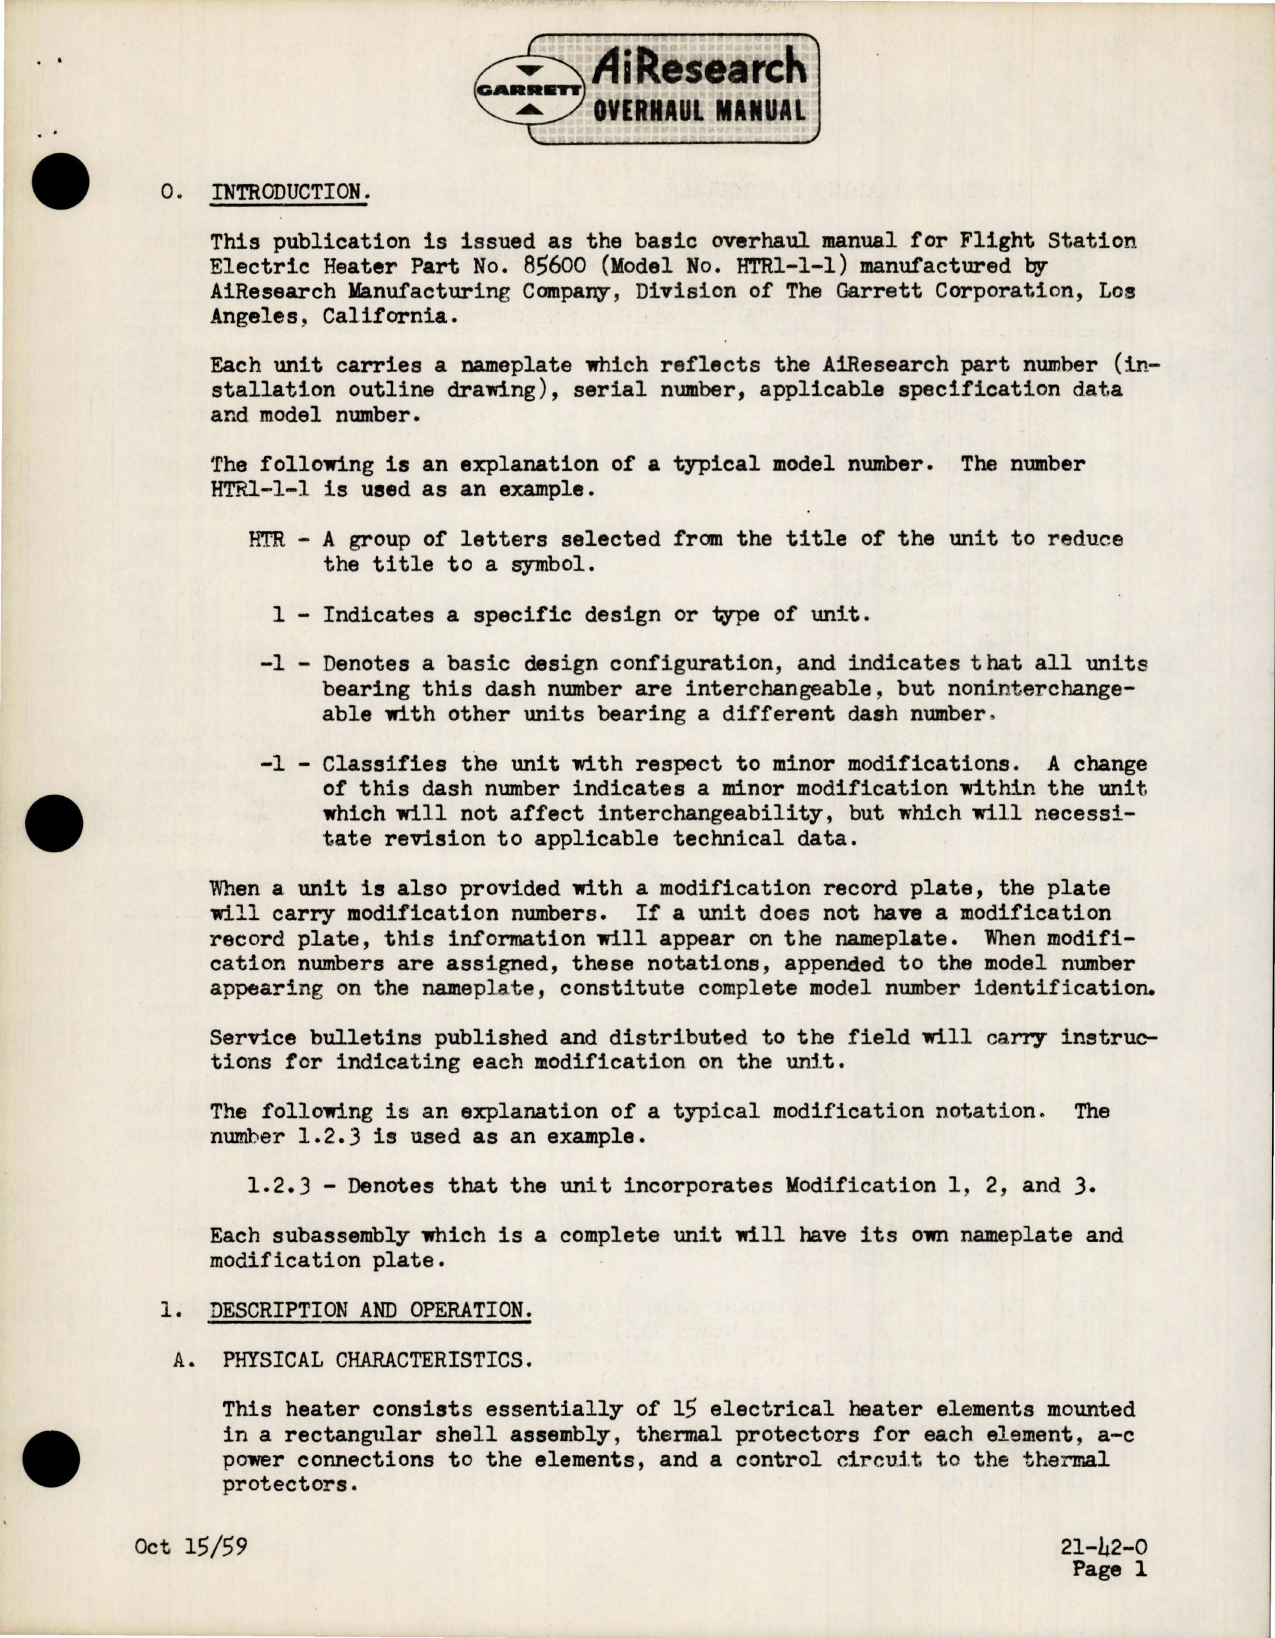 Sample page 5 from AirCorps Library document: Overhaul Manual for Flight Station Electric Heater - Part 85600 